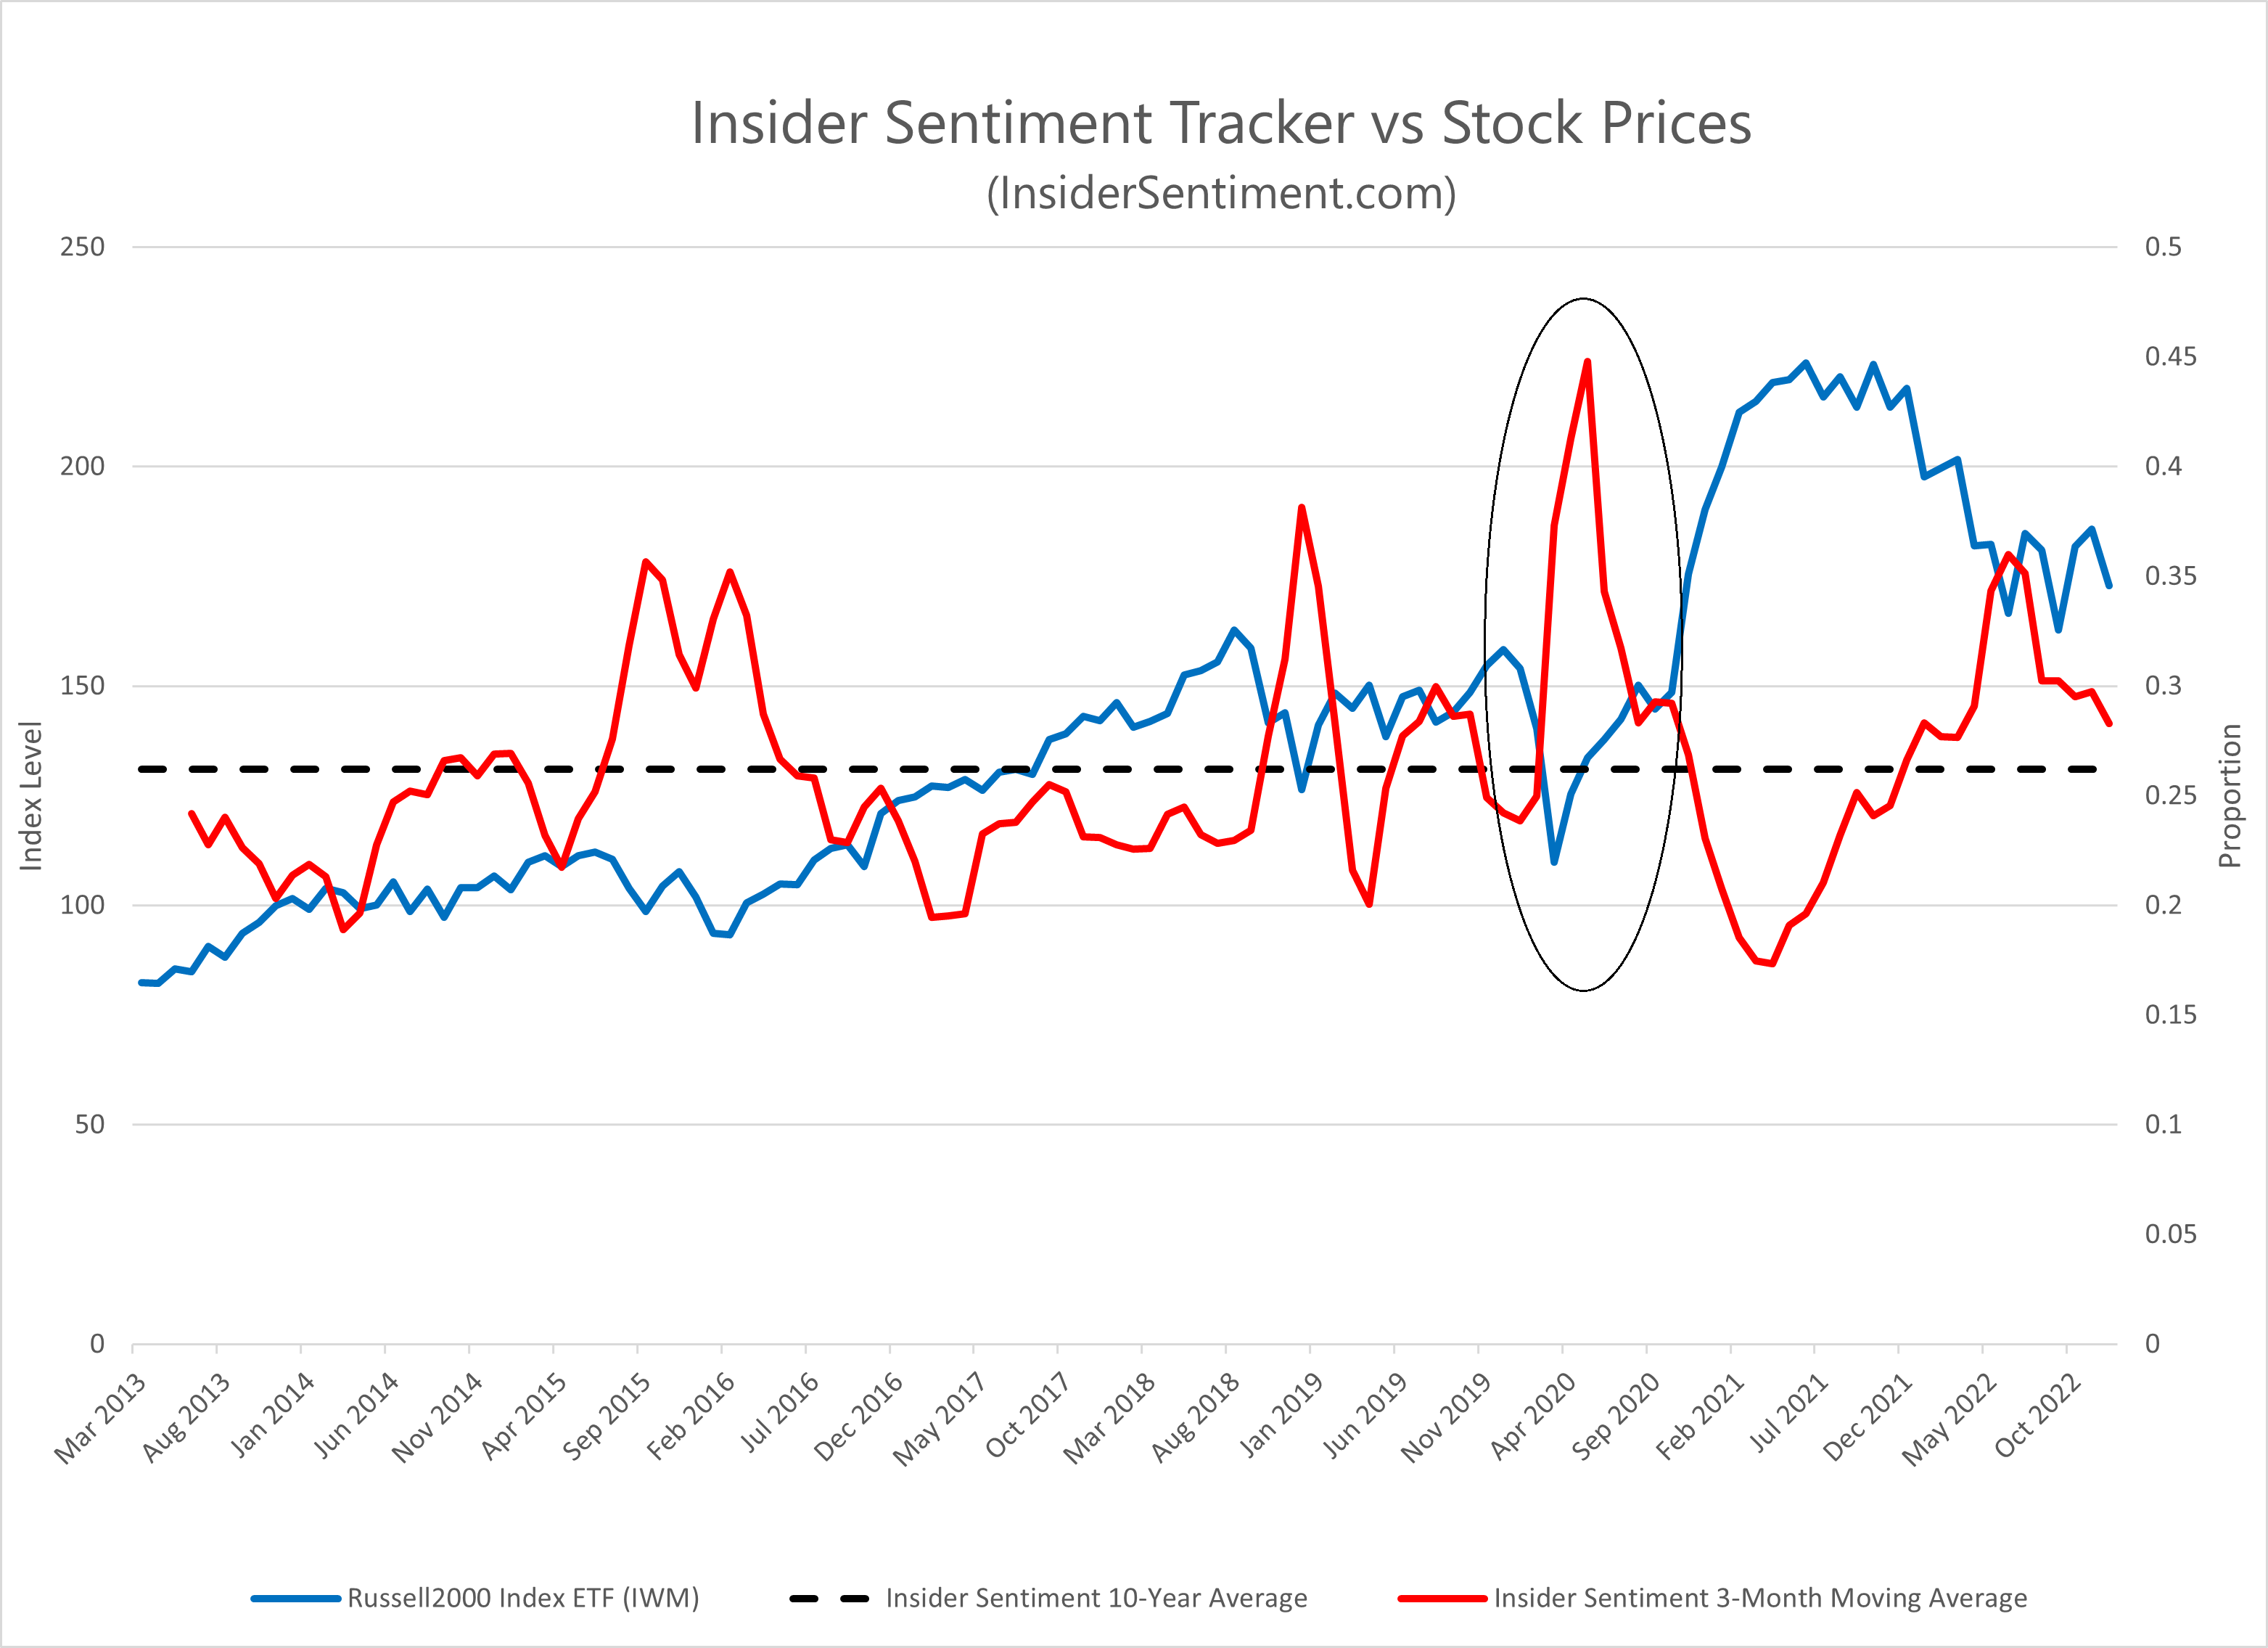 Graph showing the Insider Trading Tracker versus the Russell 2000 Index